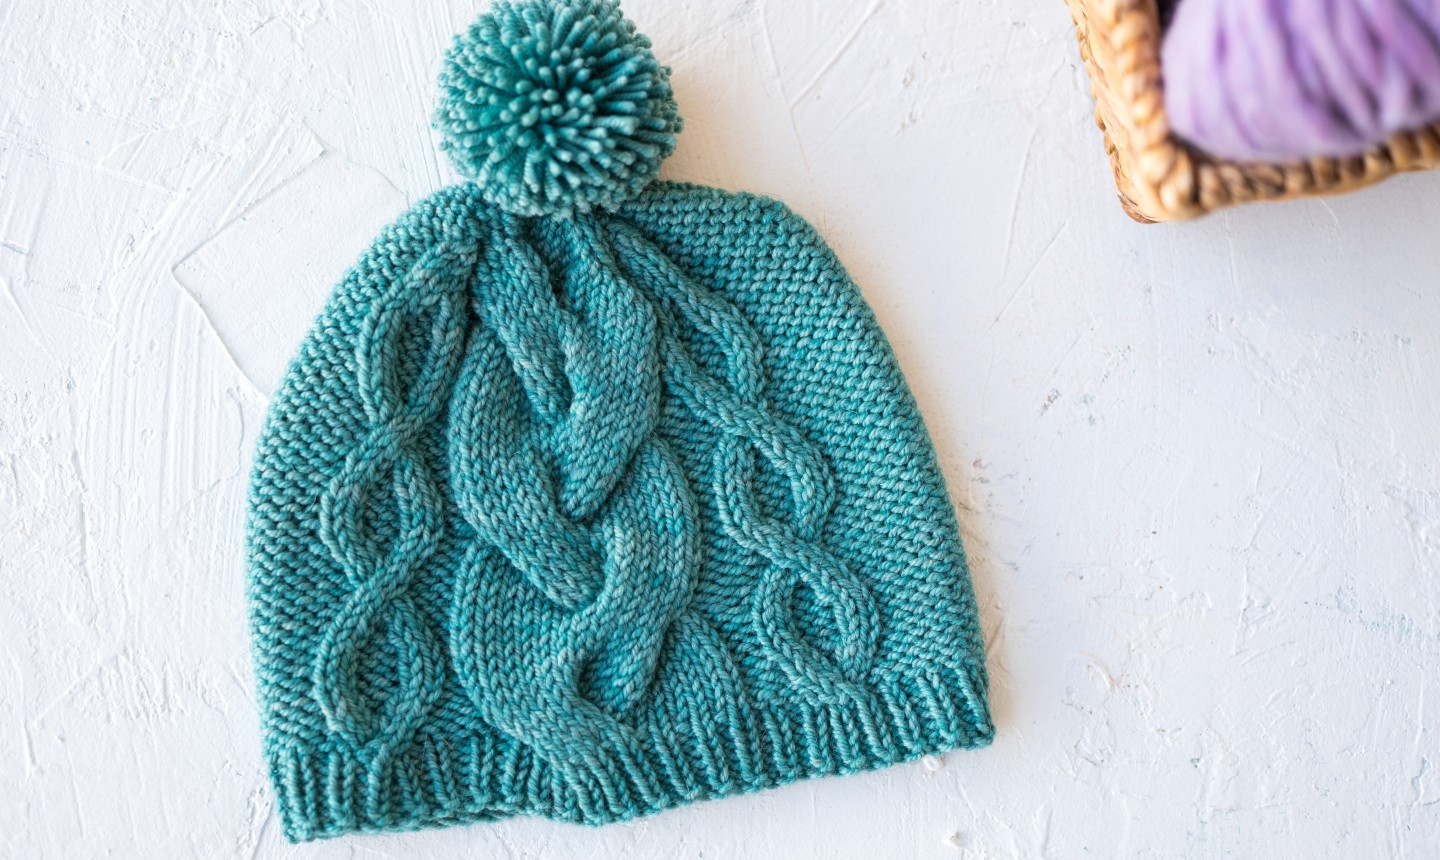 Learn Knitting Patterns Learn New Knitting Techniques With These 10 Hats